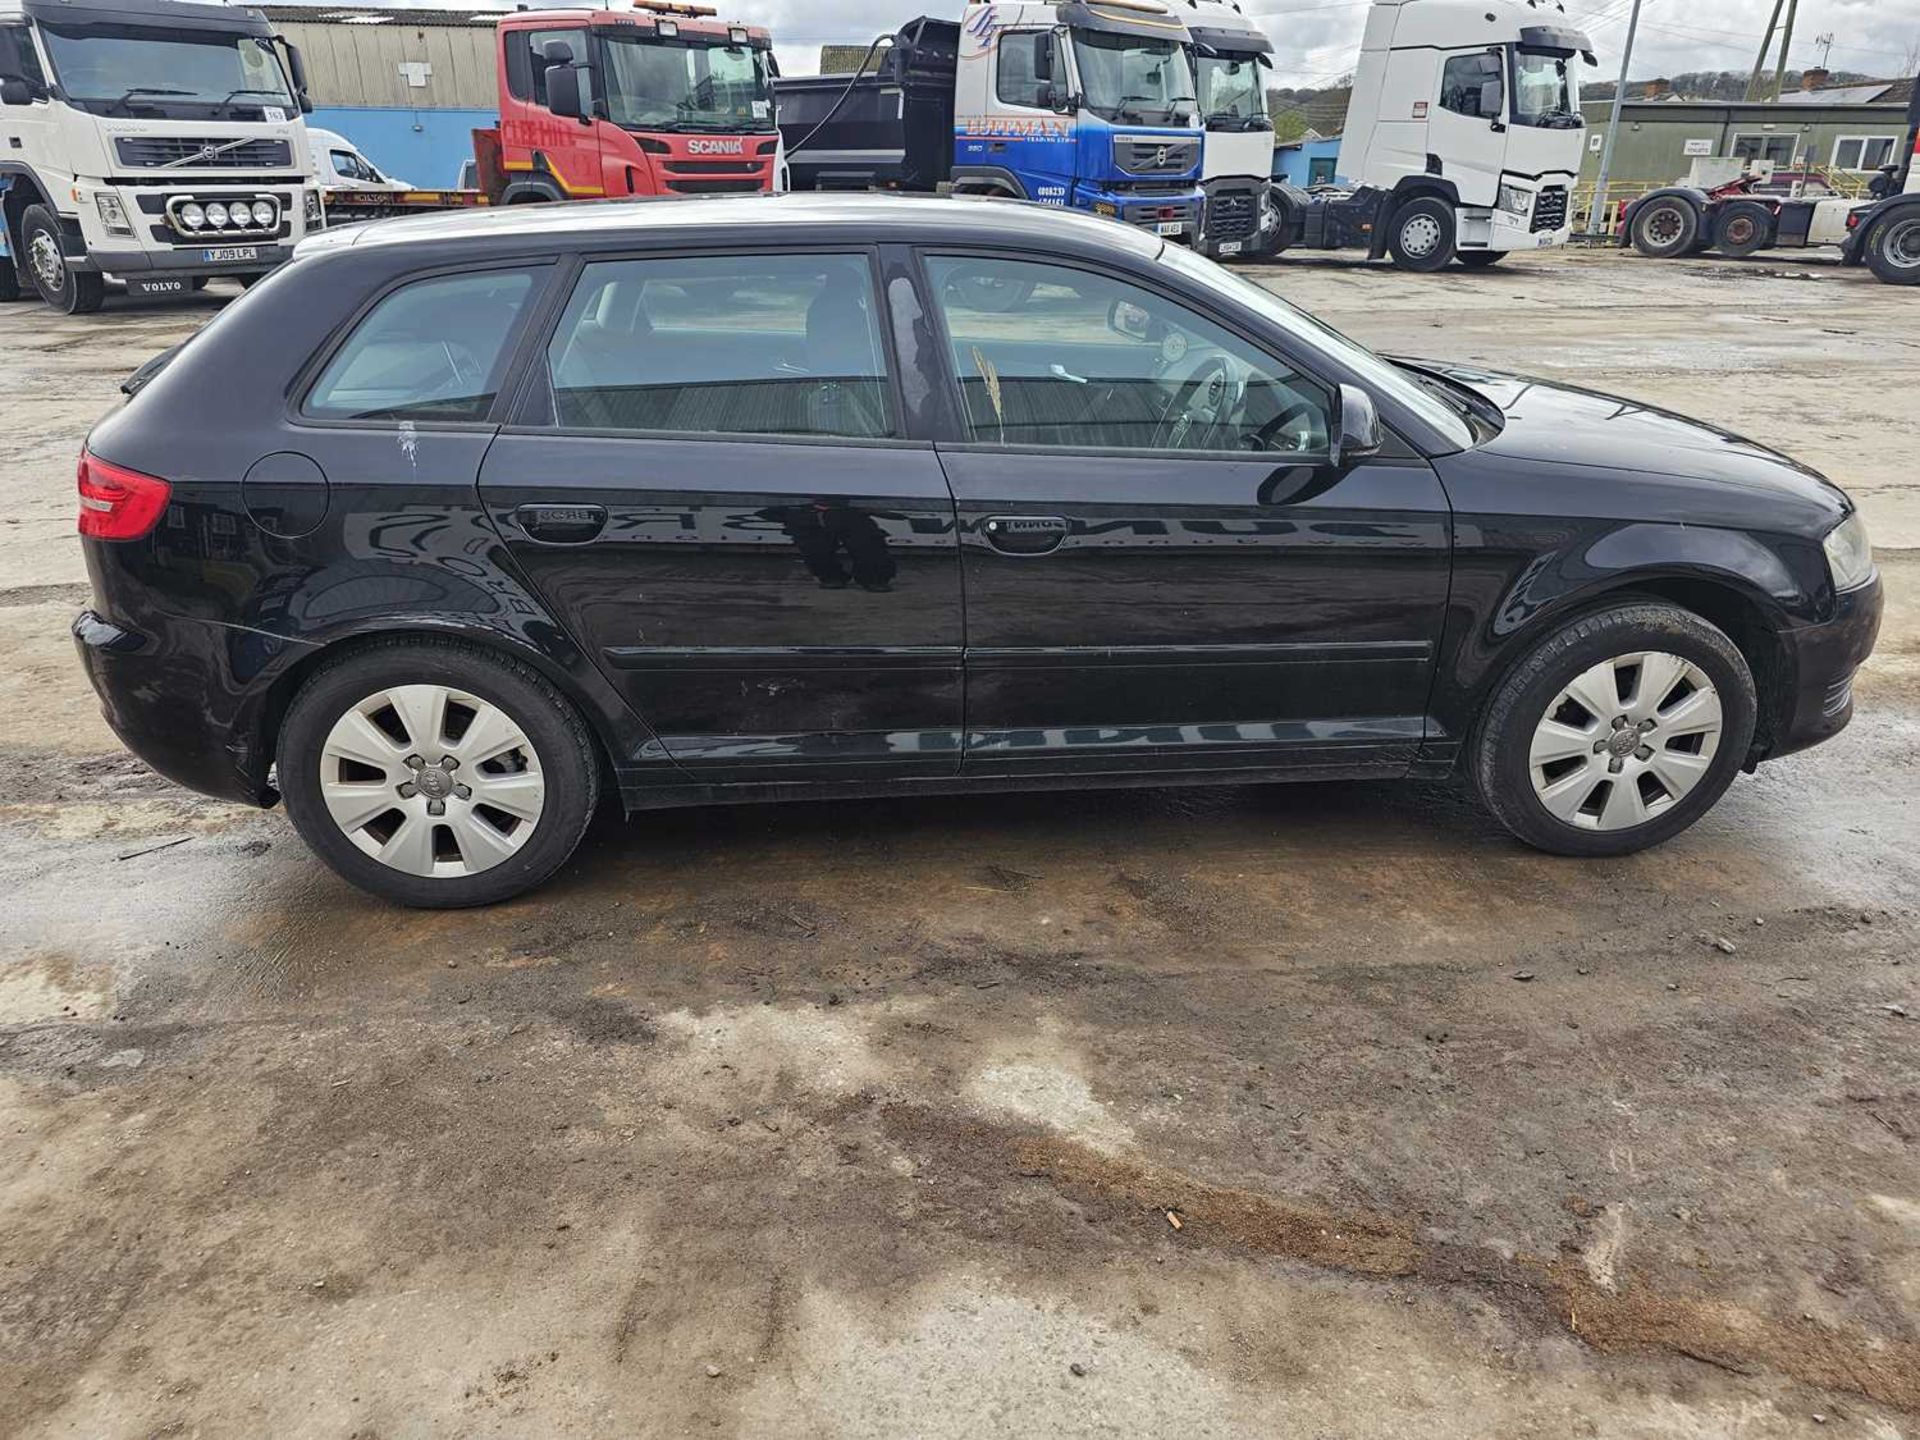 2009 Audi A3 5 Speed, A/C. (Reg. Docs. Available) - Image 7 of 27